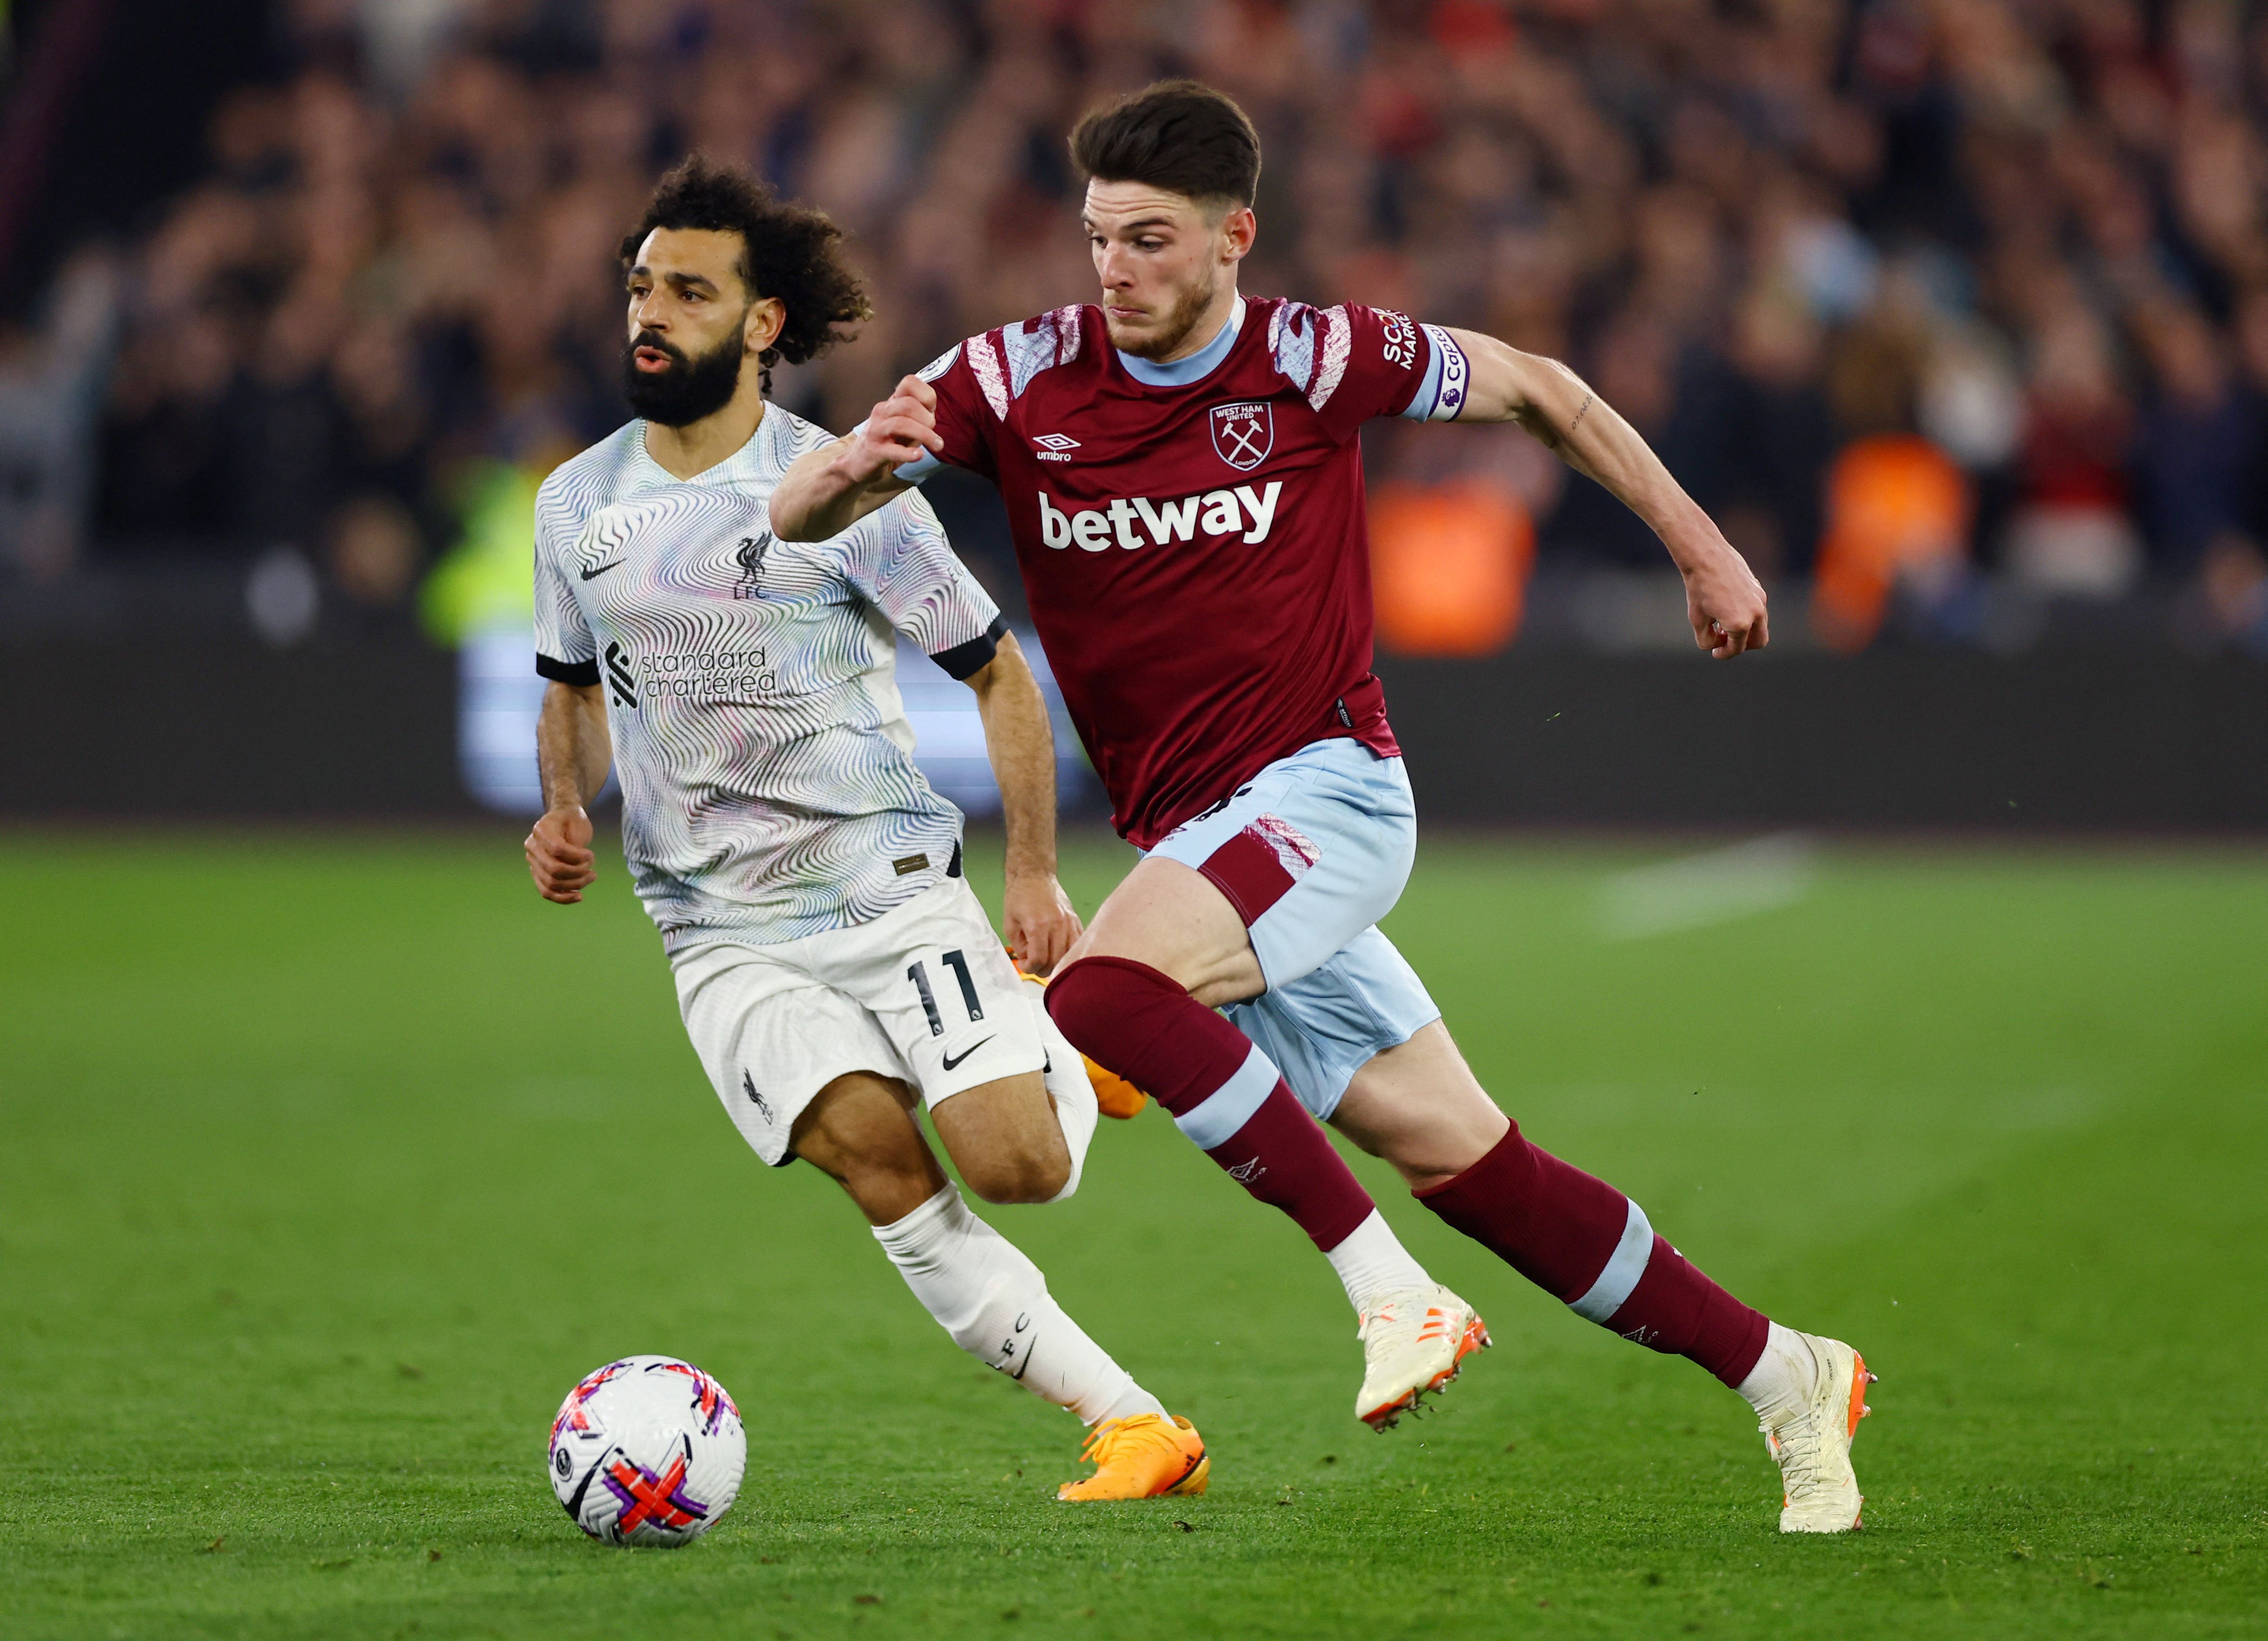 West Ham United's Declan Rice in action with Liverpool's Mohamed Salah